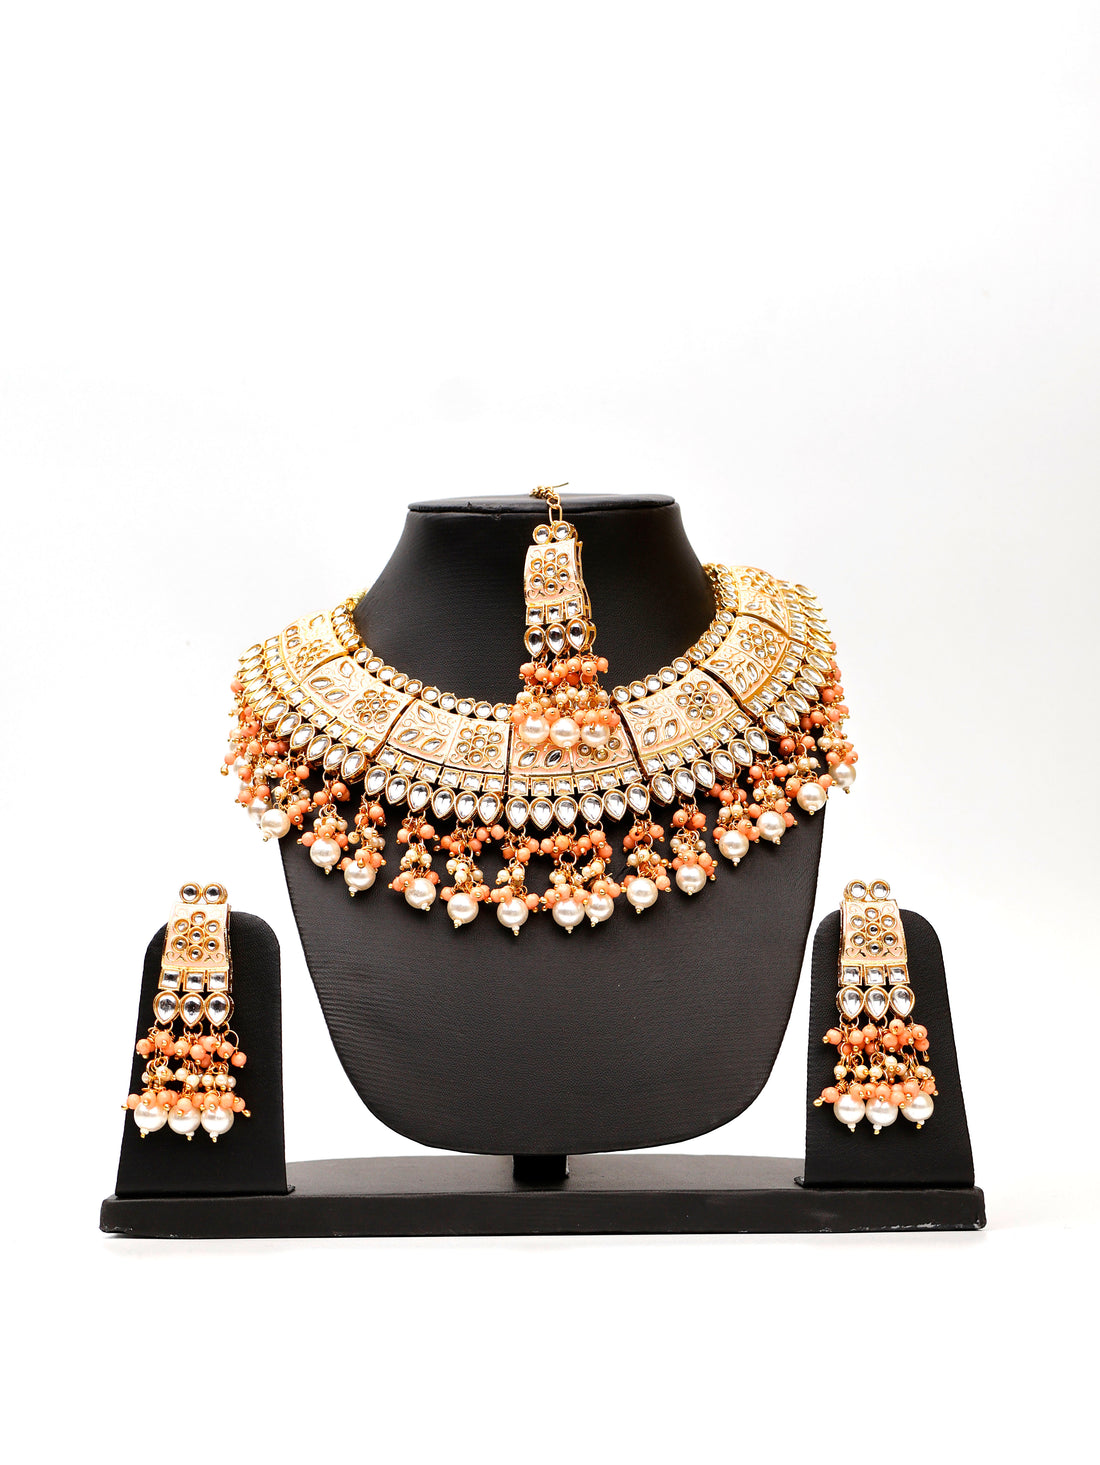 Peach Meenakari Kundan &amp; Pearl Necklace Set with Earrings &amp; Mang Tikka Fashion Jewelry for Party Festival Wedding Occasion in Noida